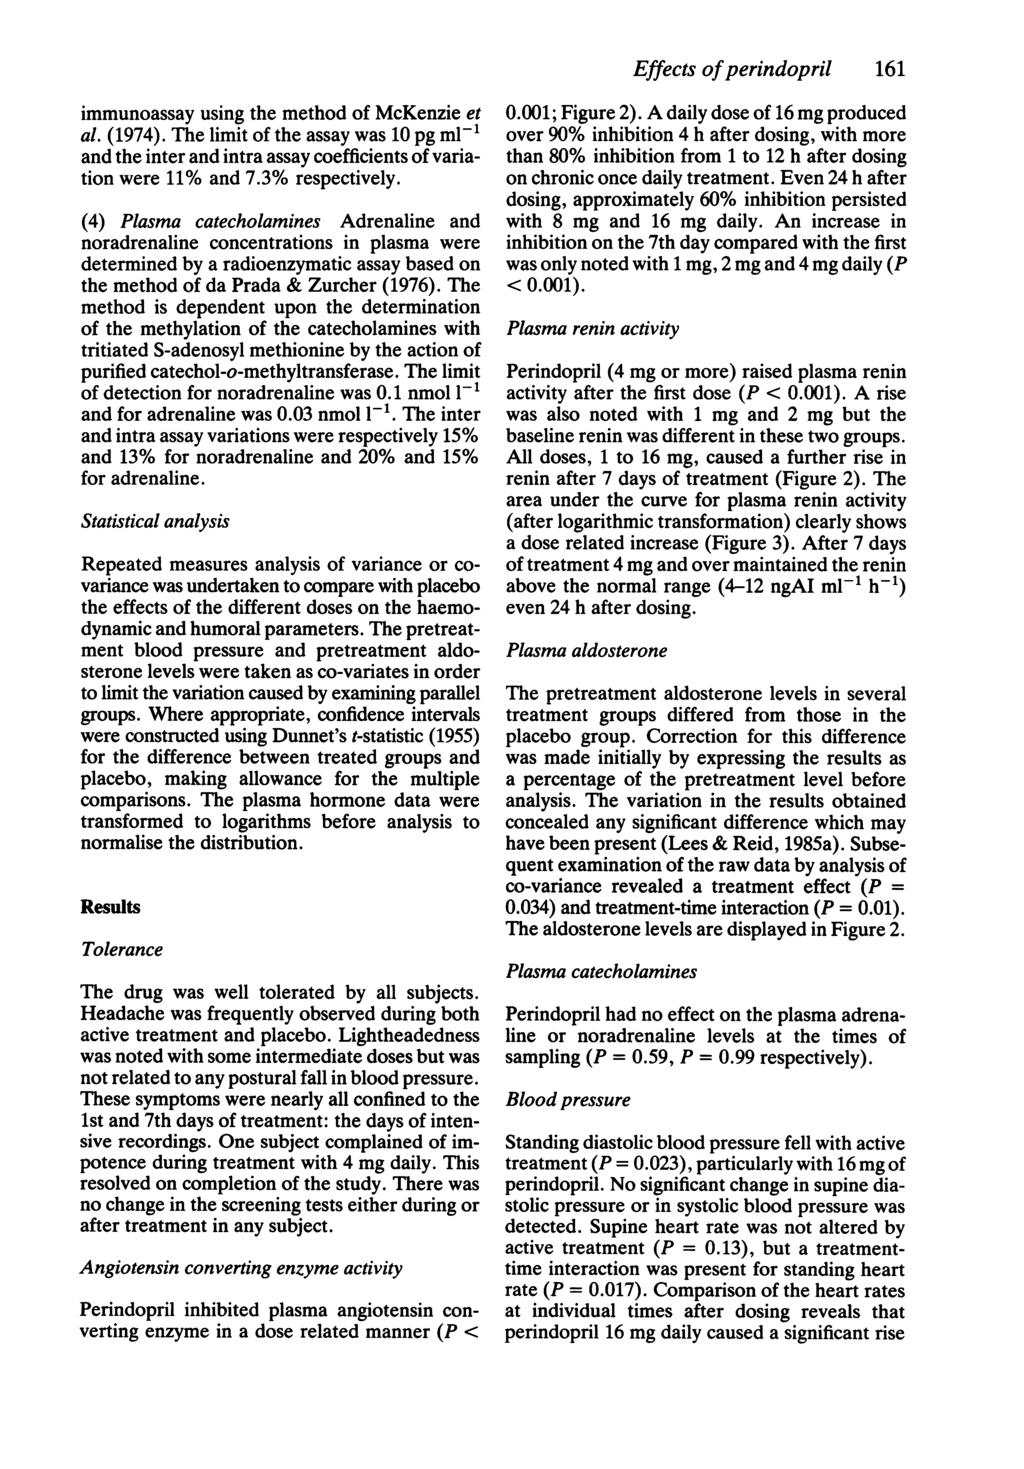 immunoassay using the method of McKenzie et al. (1974). The limit of the assay was 10 pg ml-' and the inter and intra assay coefficients of variation were 11% and 7.3% respectively.